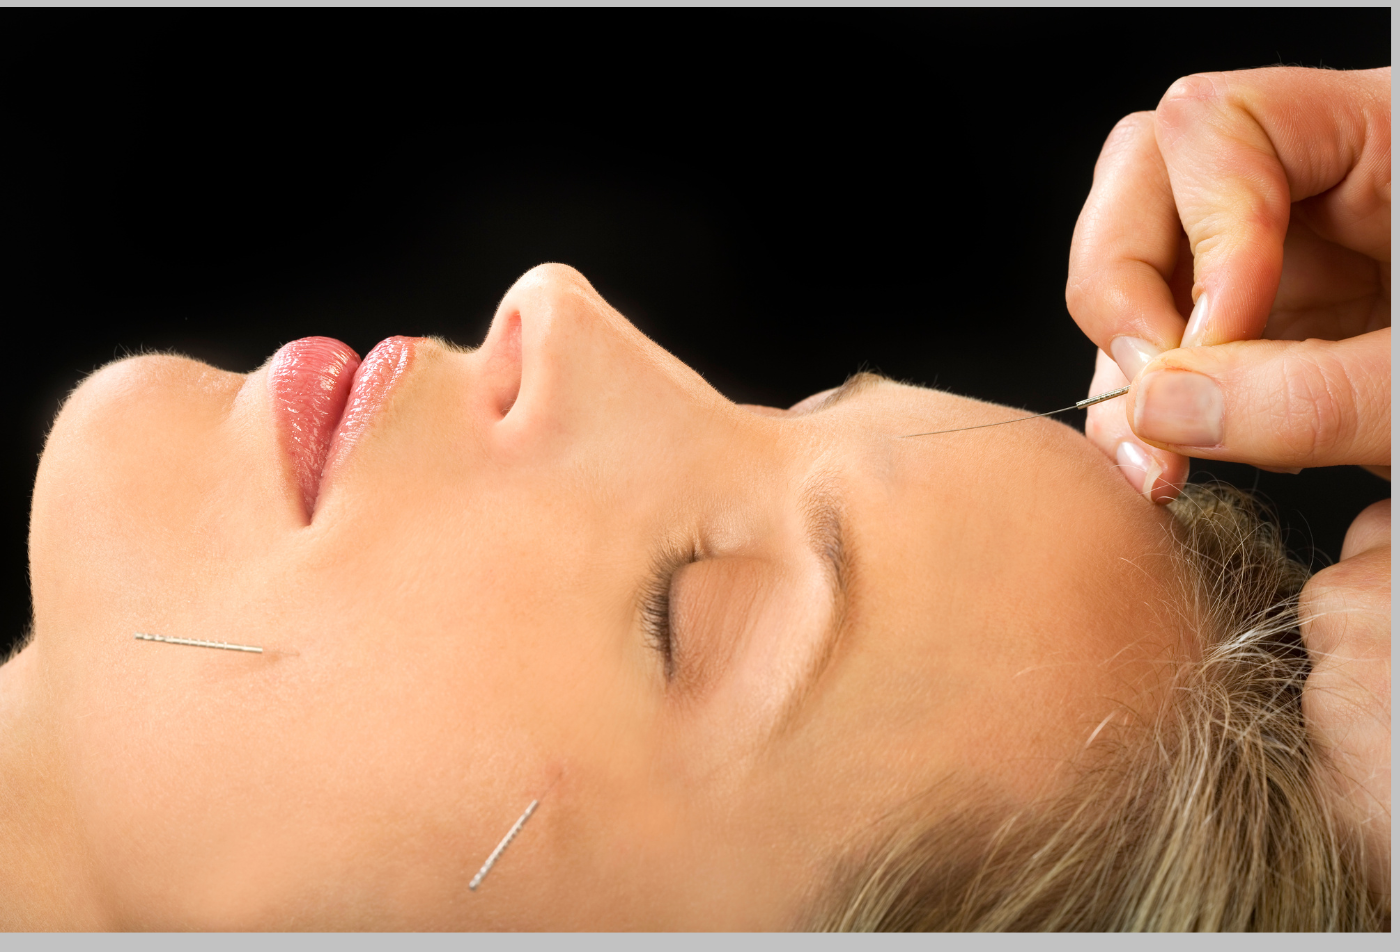 Anti-Aging Acupuncture Facial Rejuvenation Services in St. Petersburg Florida. Call Today to Book an Appointment!